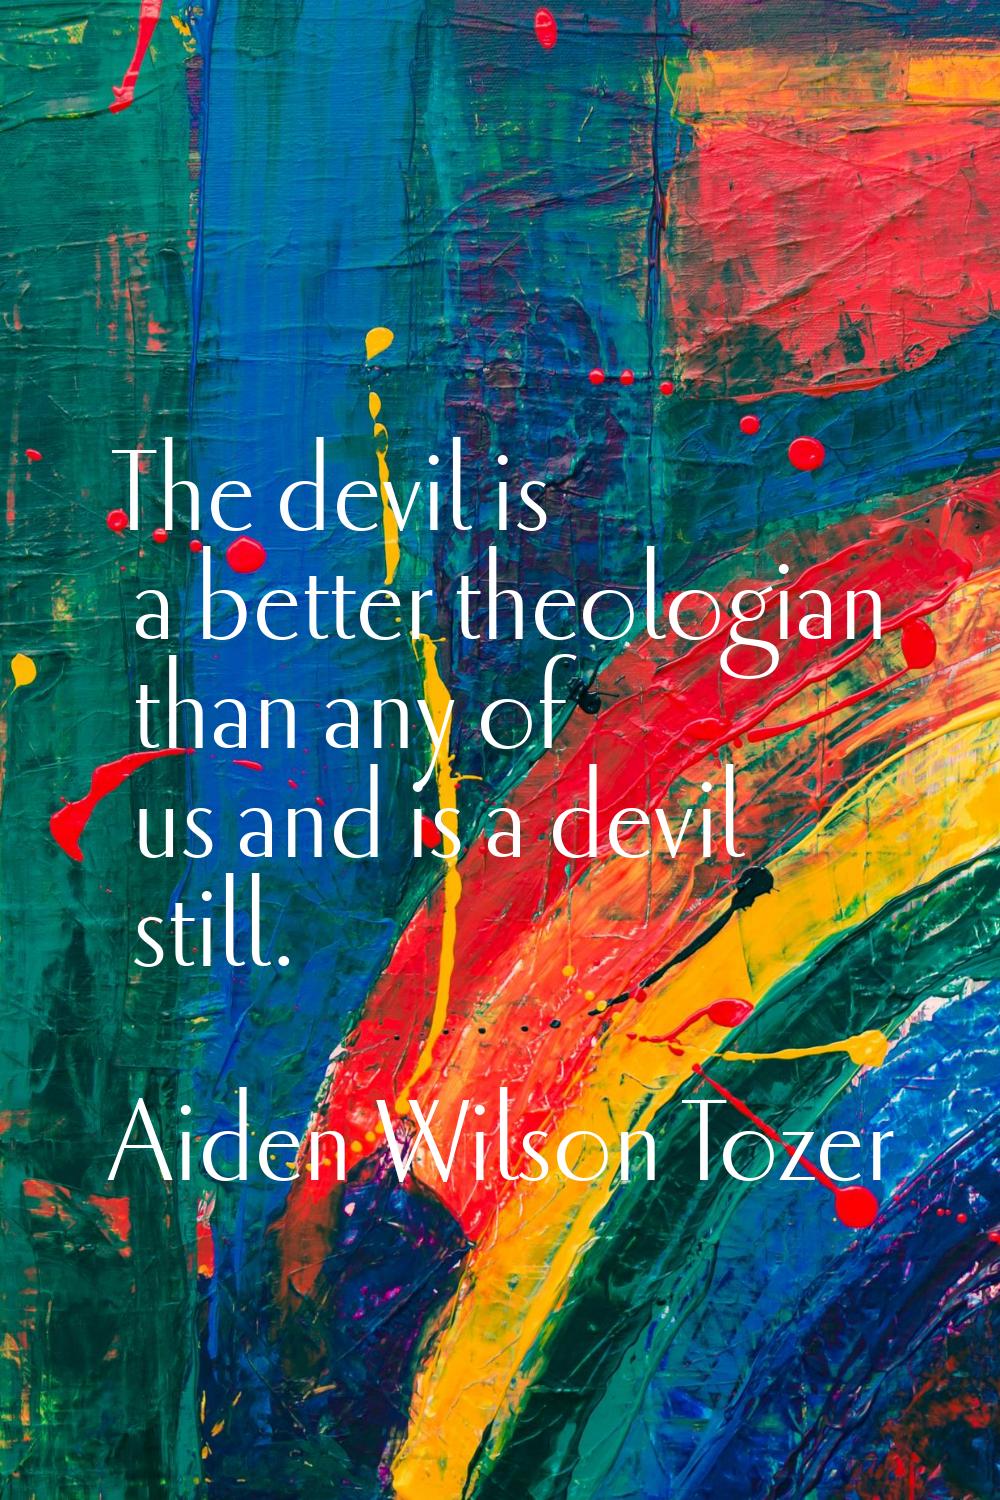 The devil is a better theologian than any of us and is a devil still.